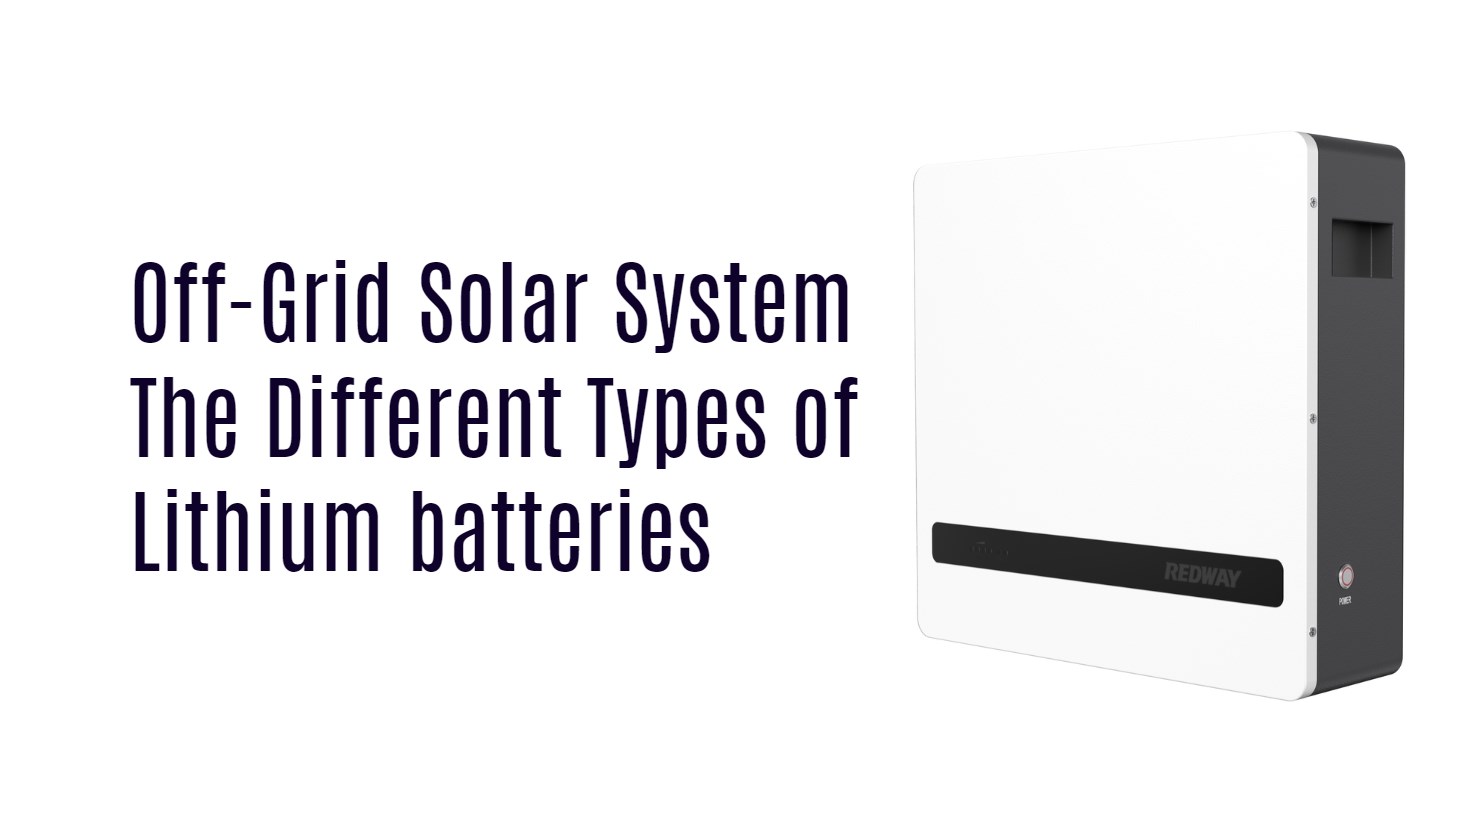 The Different Types of Lithium batteries for off-grid solar system, 24v 100ah powerwall lithium battery lfp oem factory powerwall